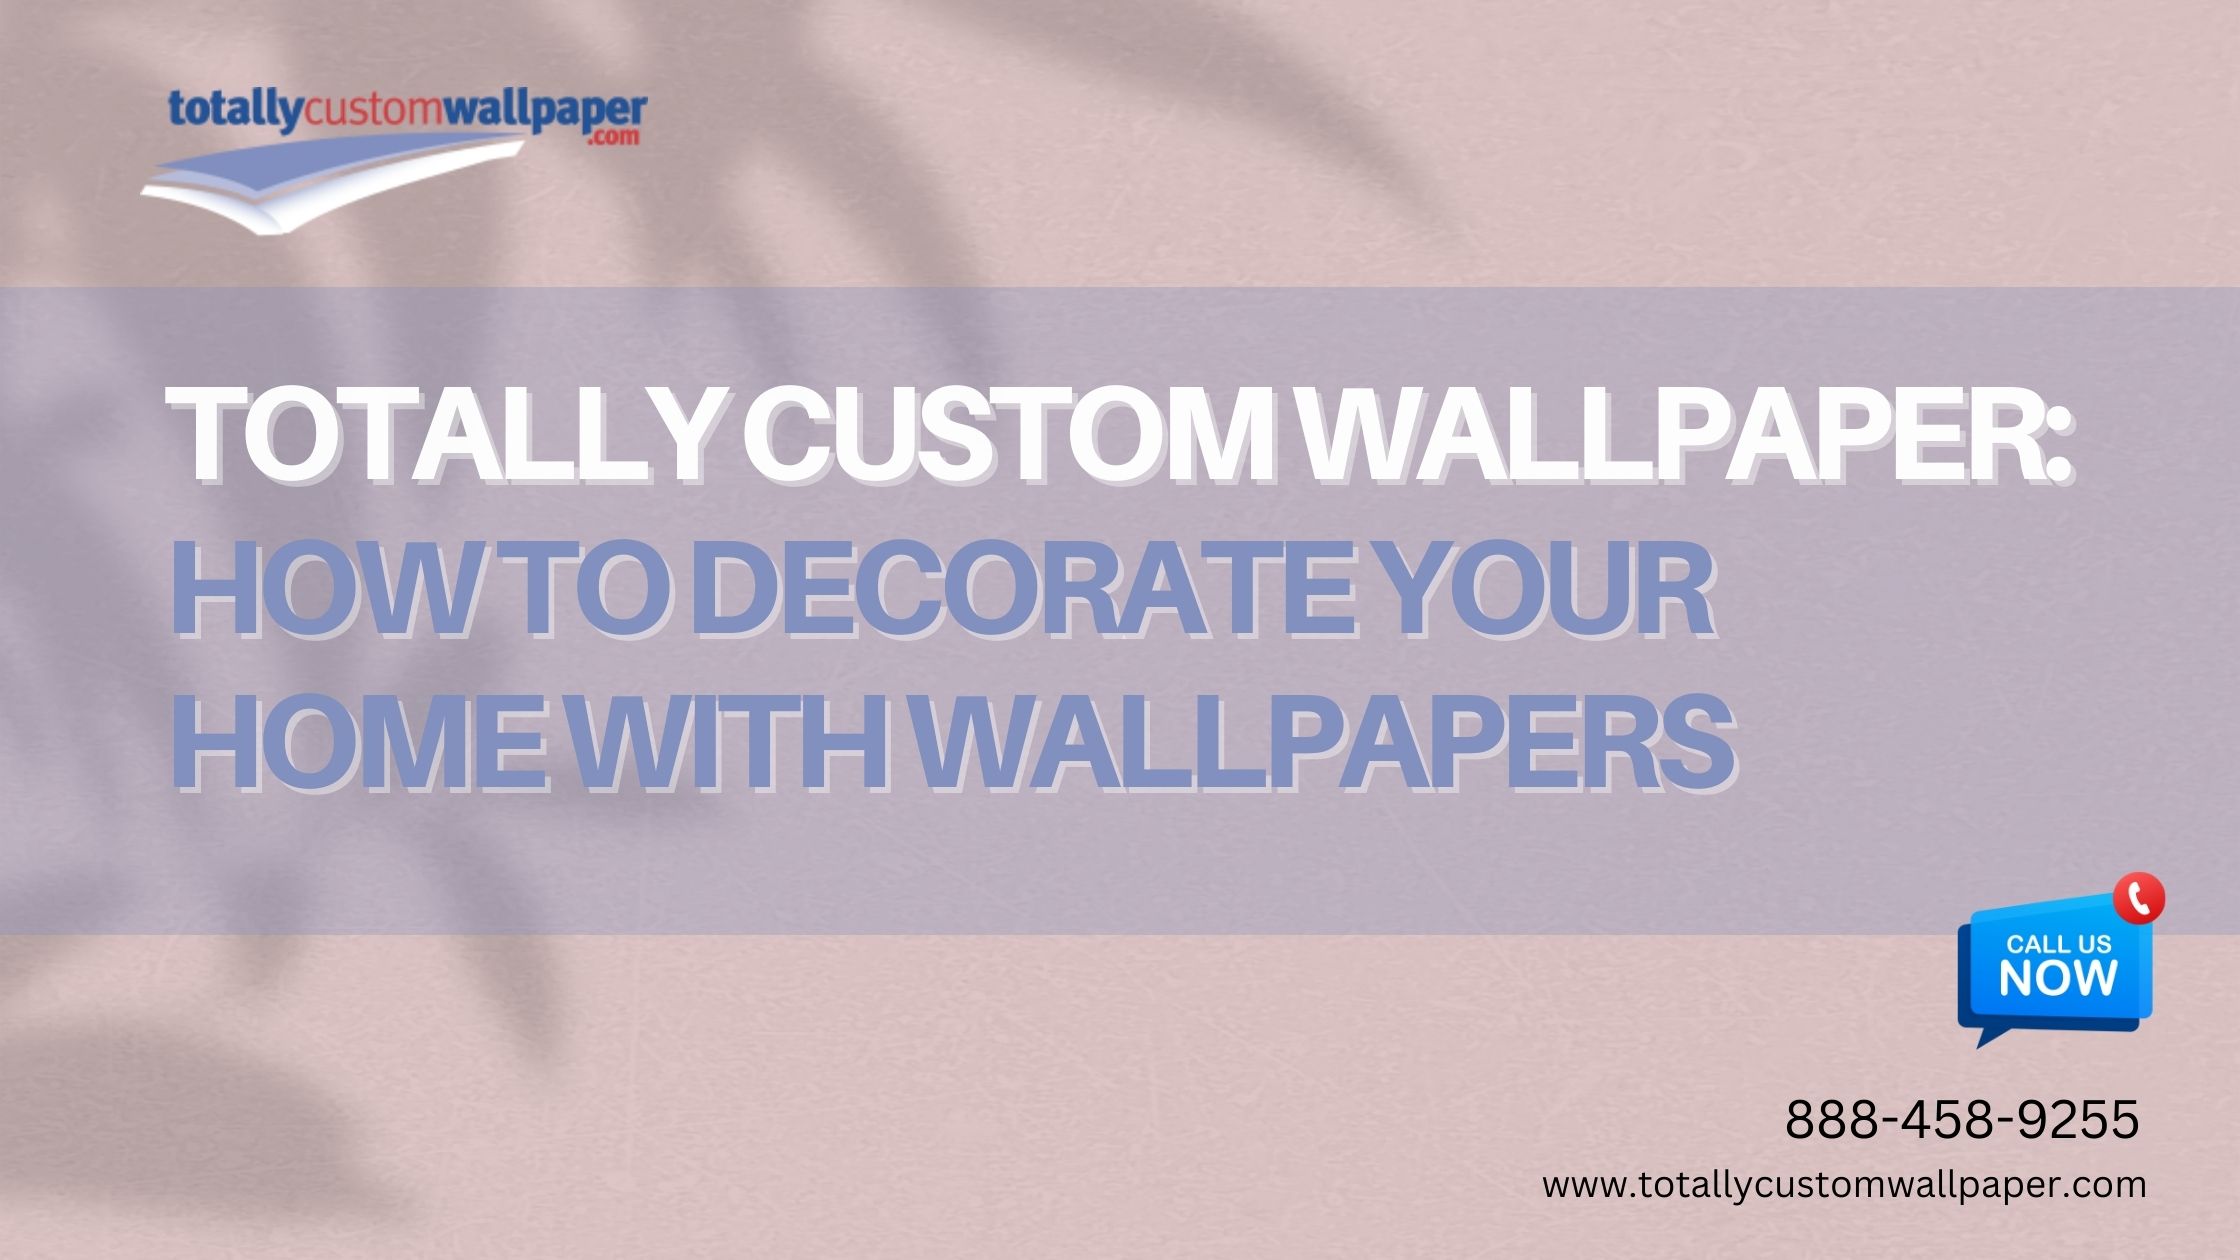 totally custom wallpaper how to decorate your home with wallpapers